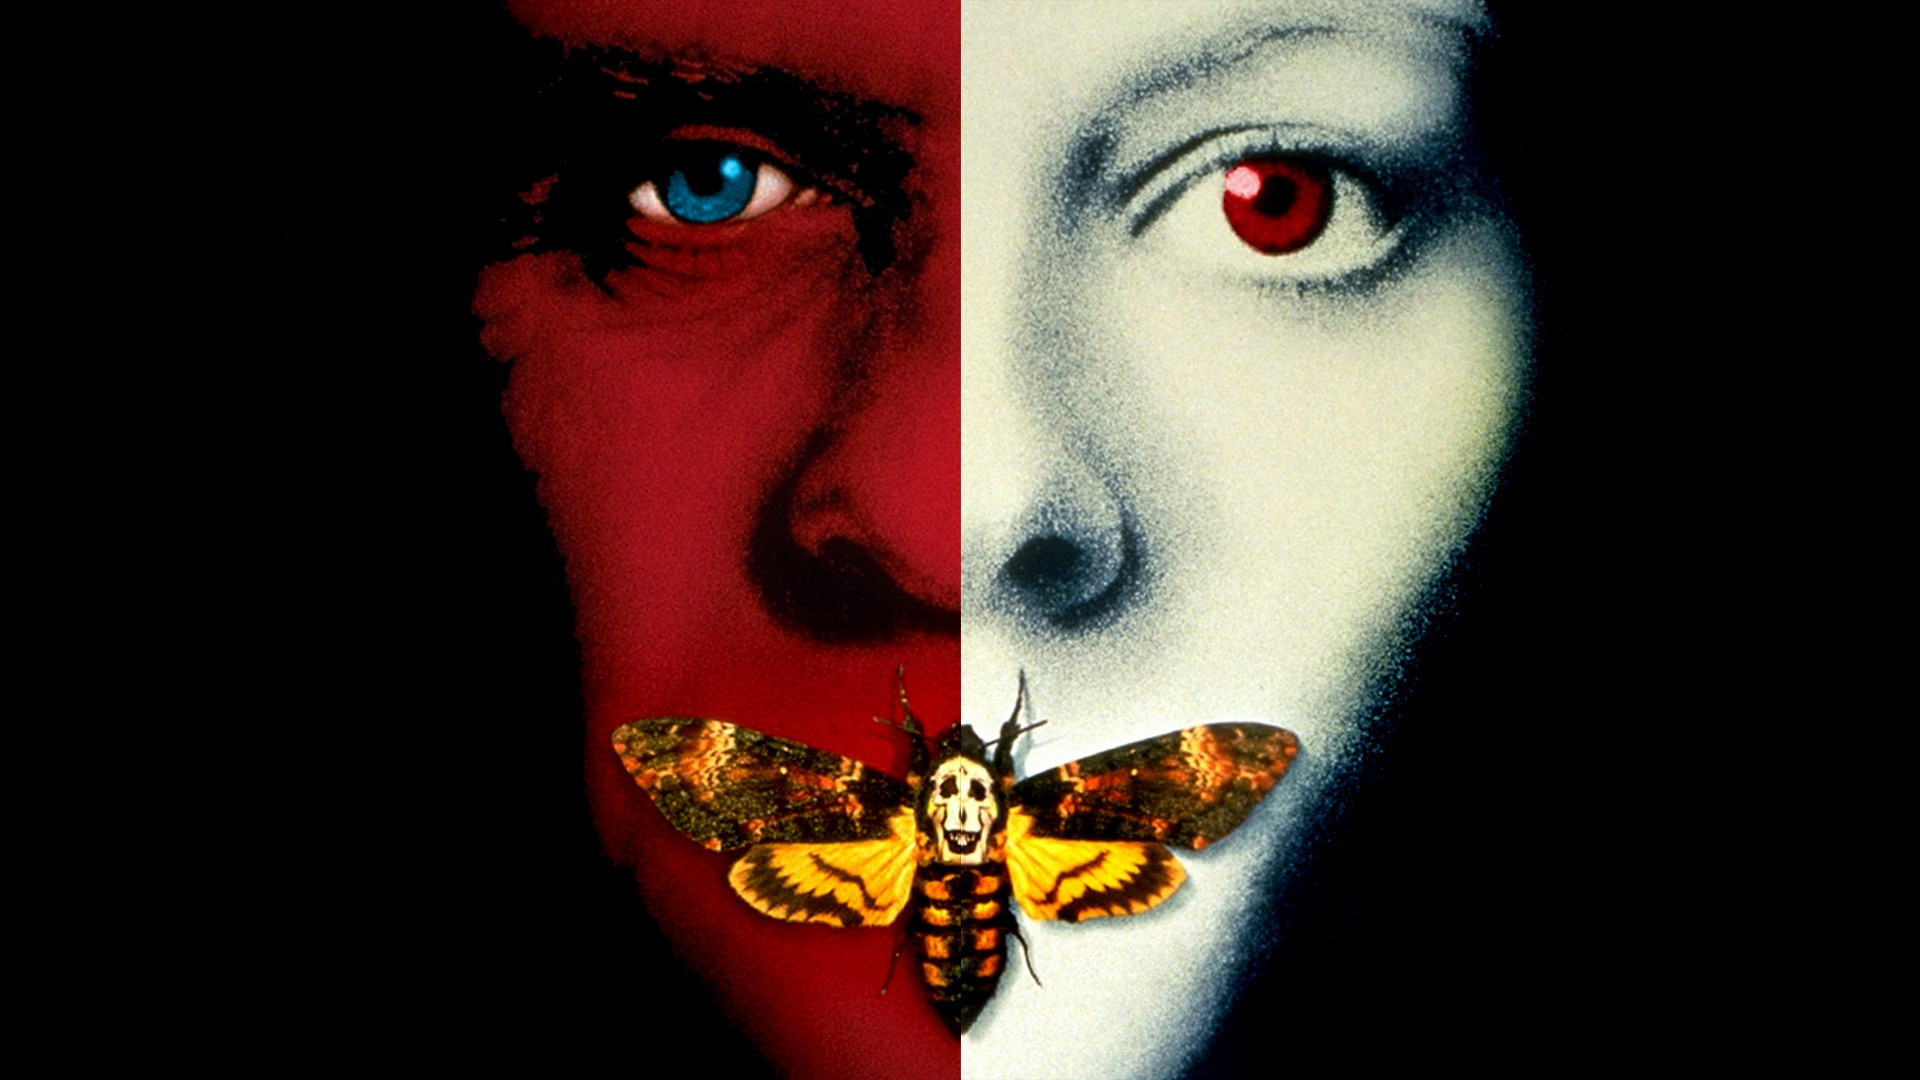 The Silence Of The Lambs HD wallpapers, Desktop wallpaper - most viewed